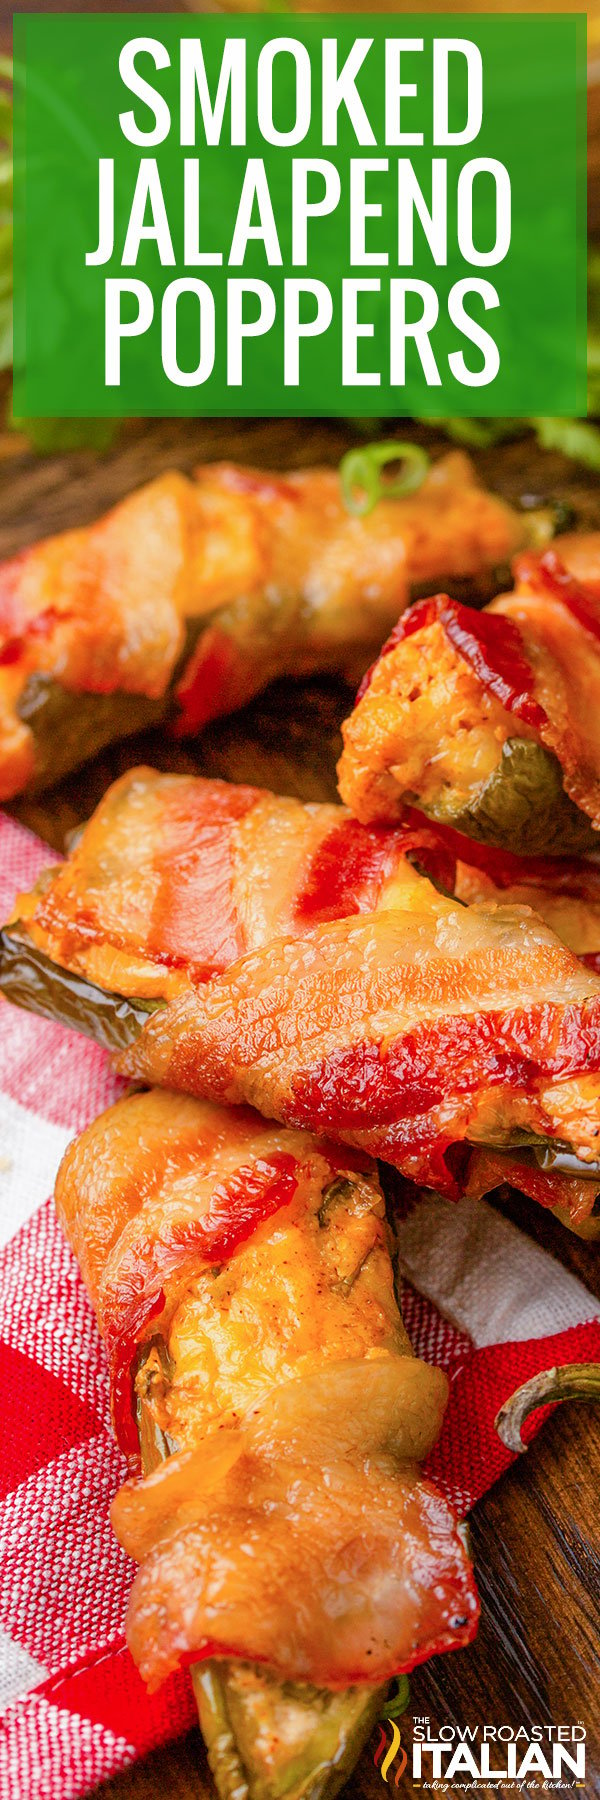 titled image (and shown): smoked jalapeno poppers close up